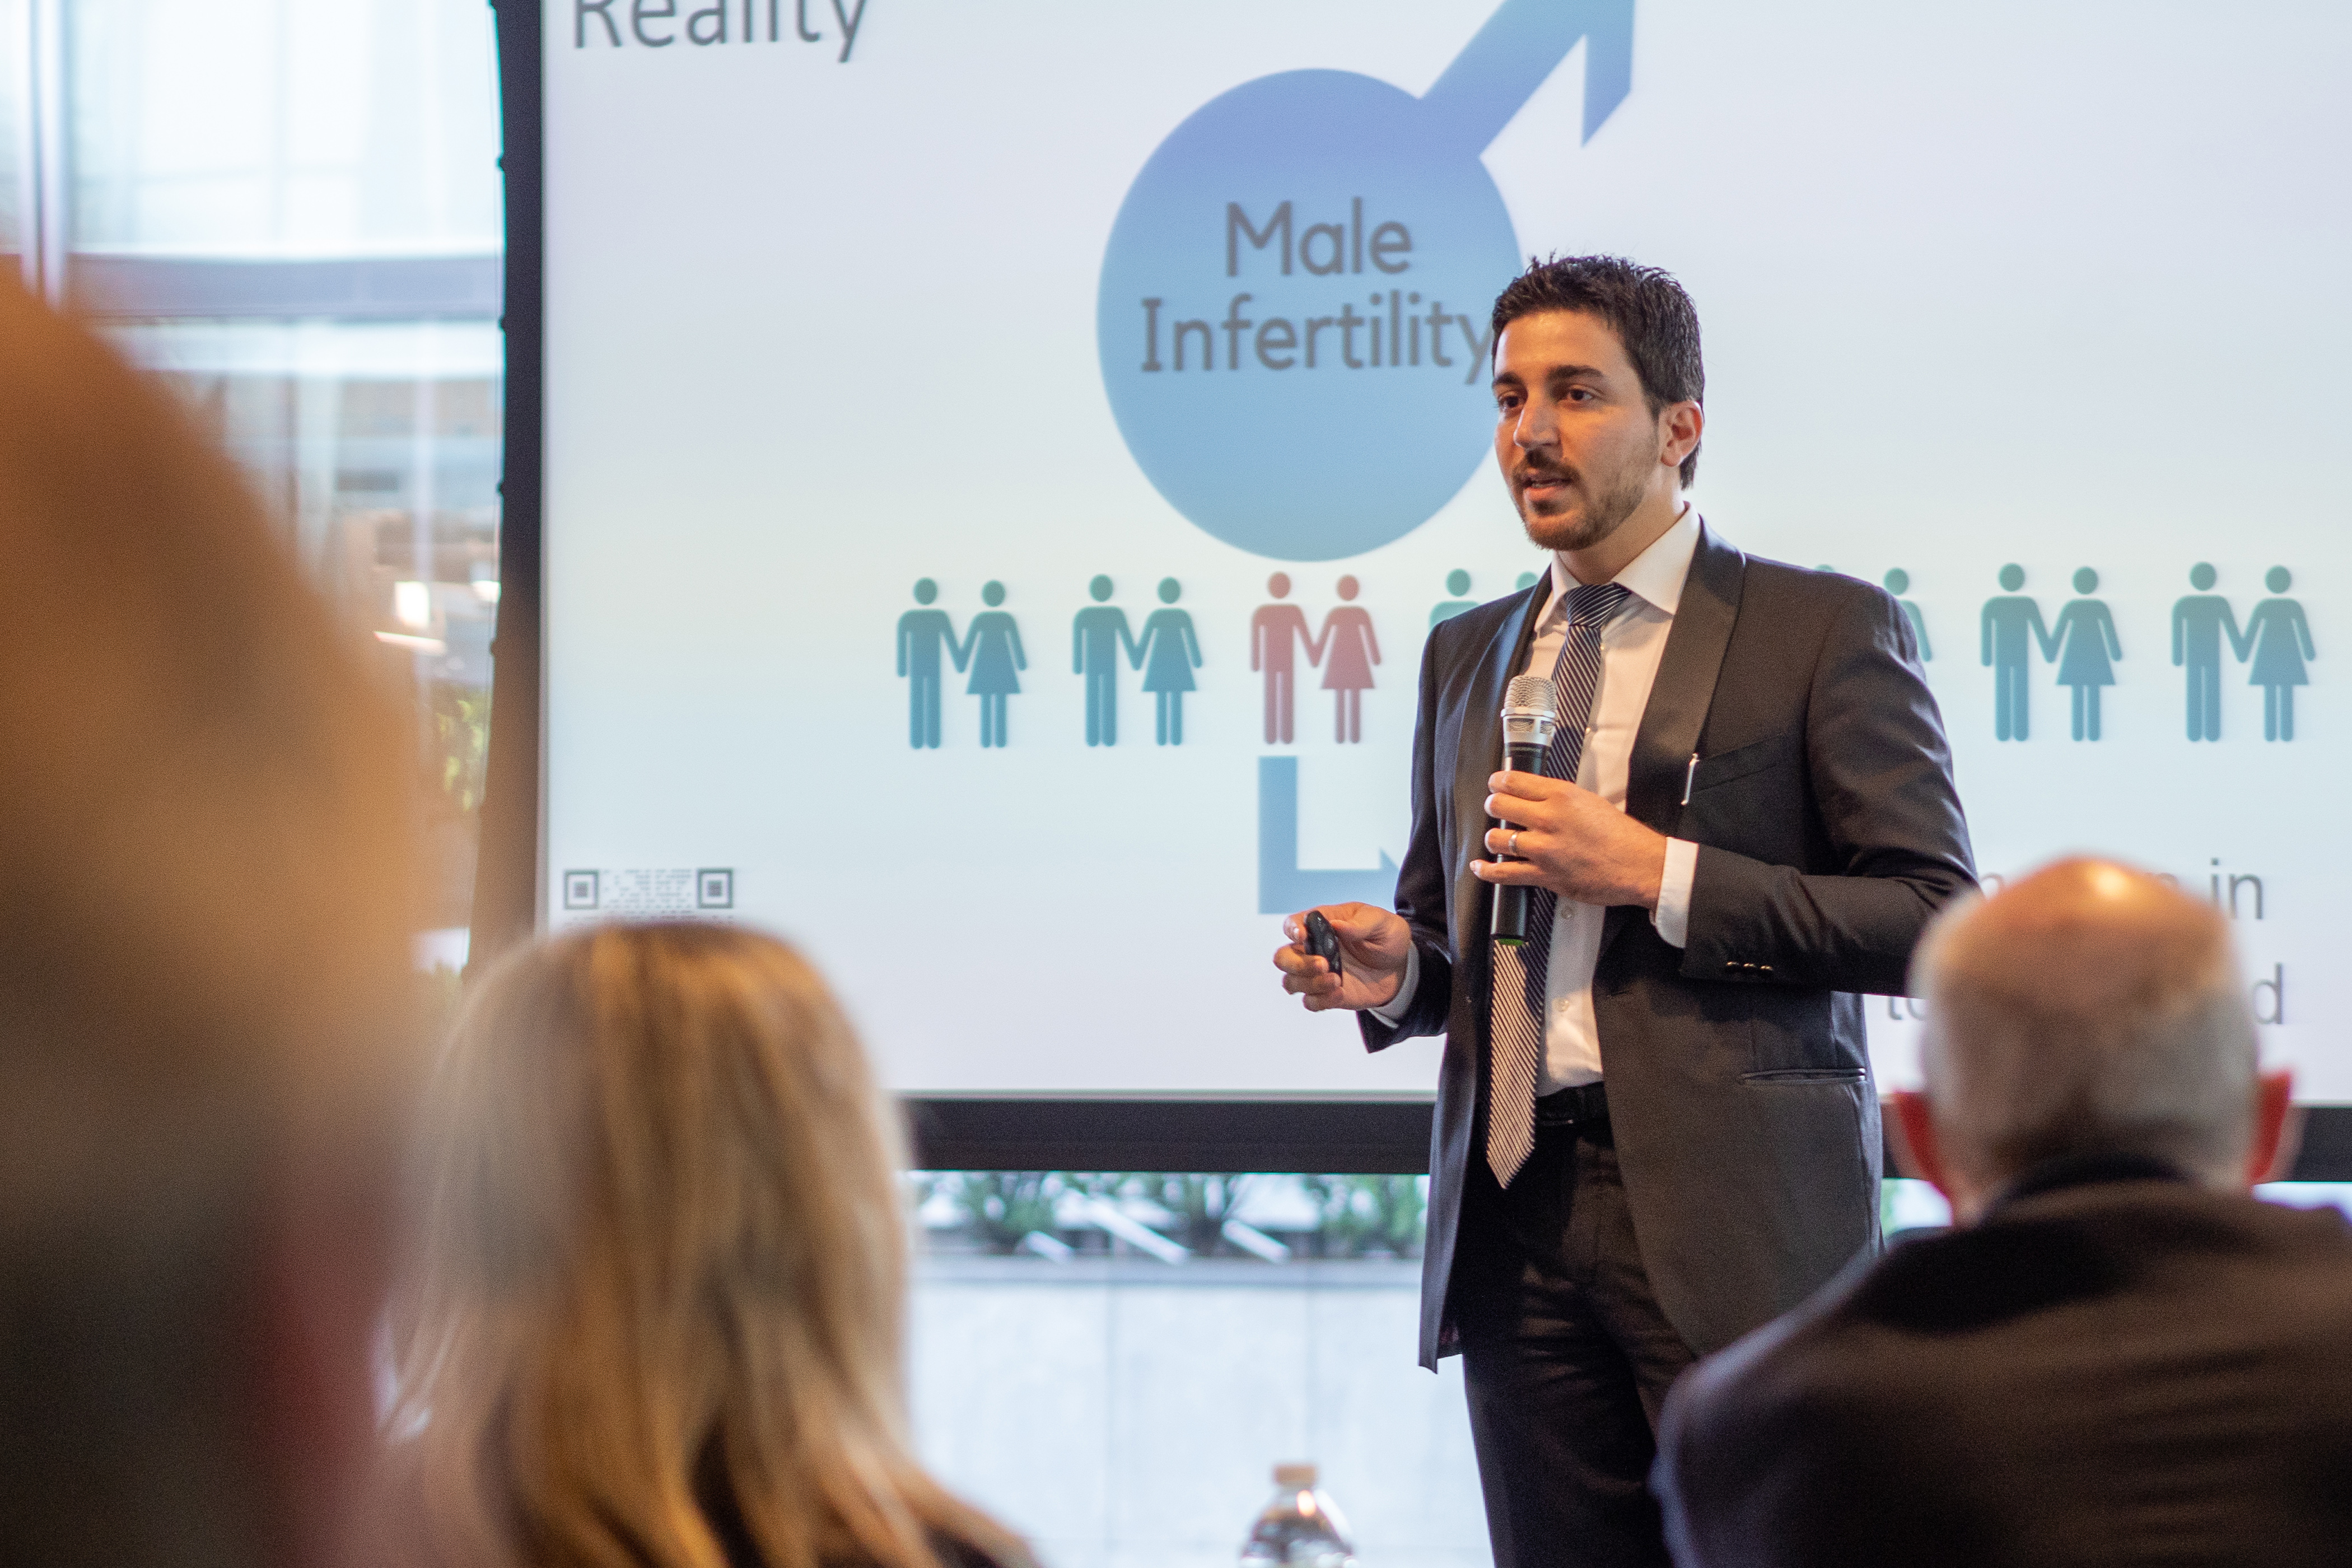 Engineering doctoral student Reza Amin presents the QRFertile concept to a panel of judges during the Wolff New Venture Competition. (Eric Olson for UConn)